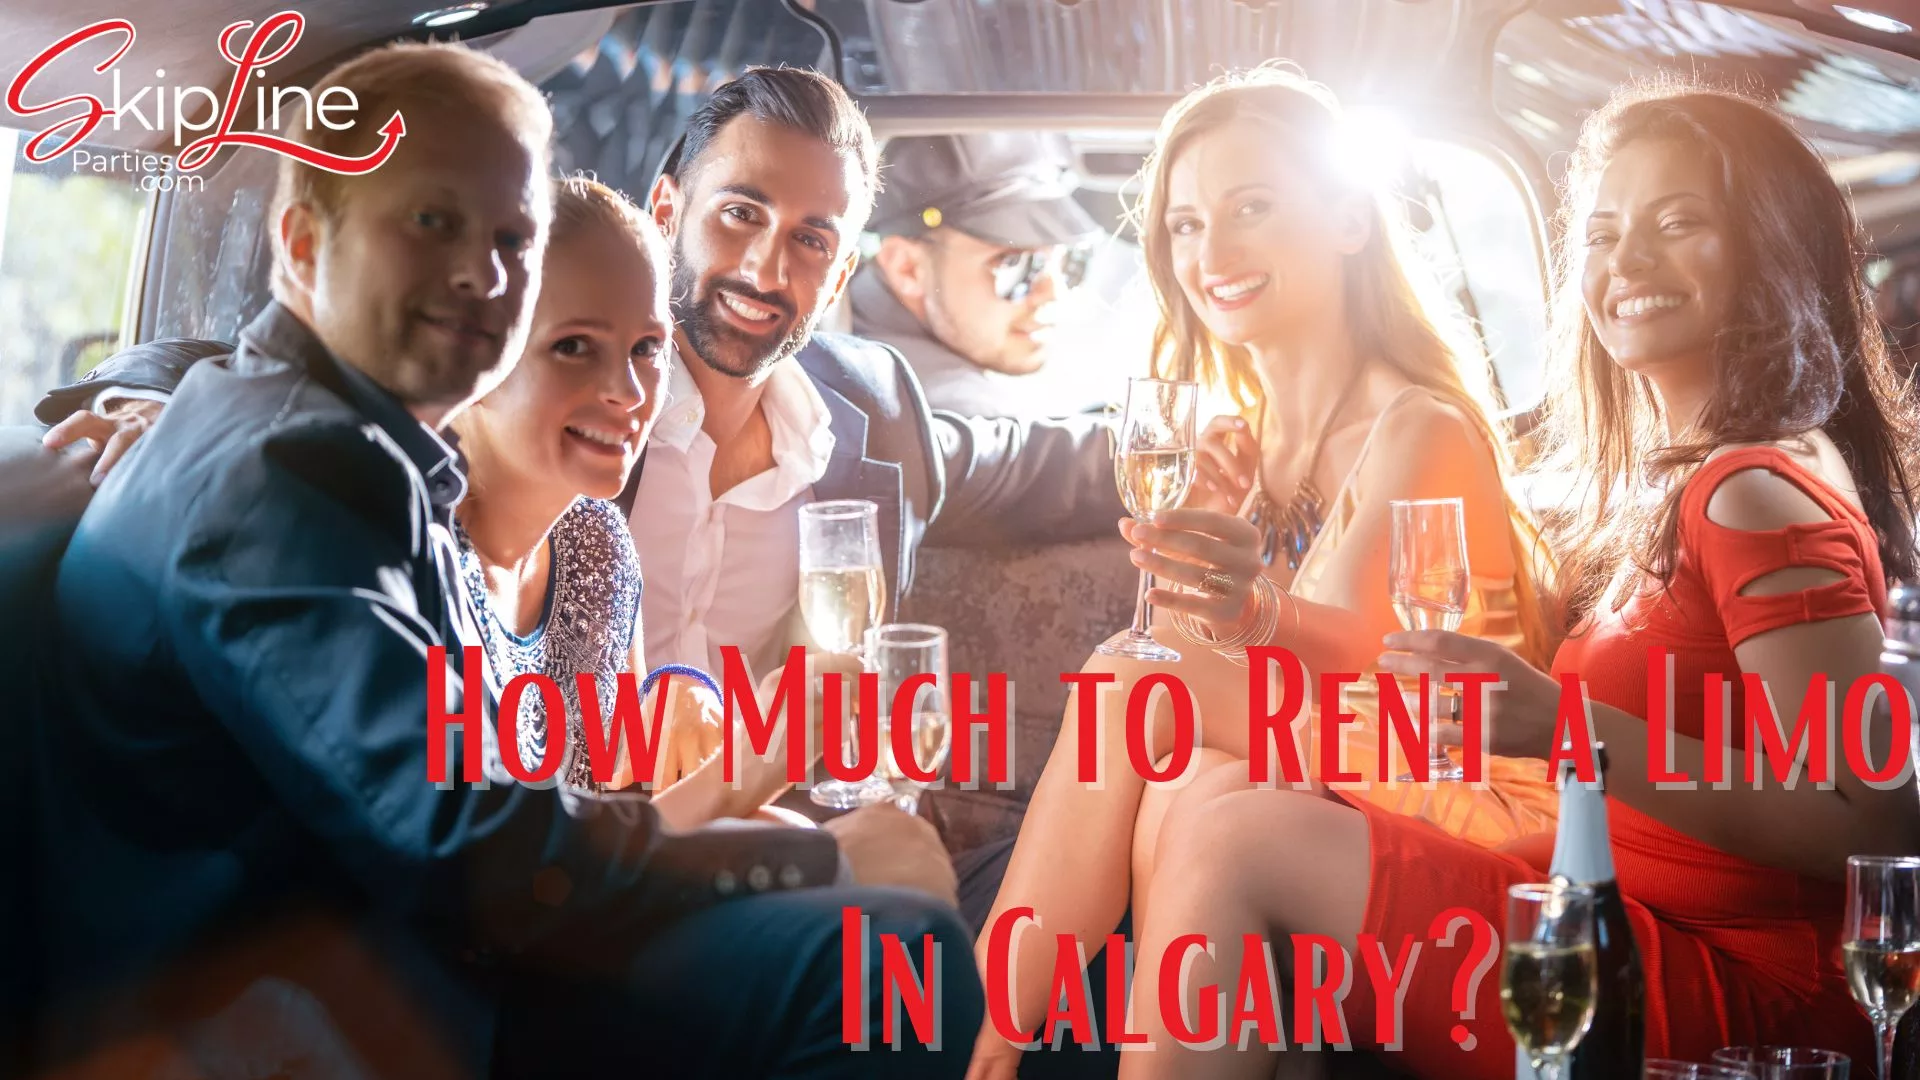 How Much to Rent a Limo In Calgary by SkipLine Parties